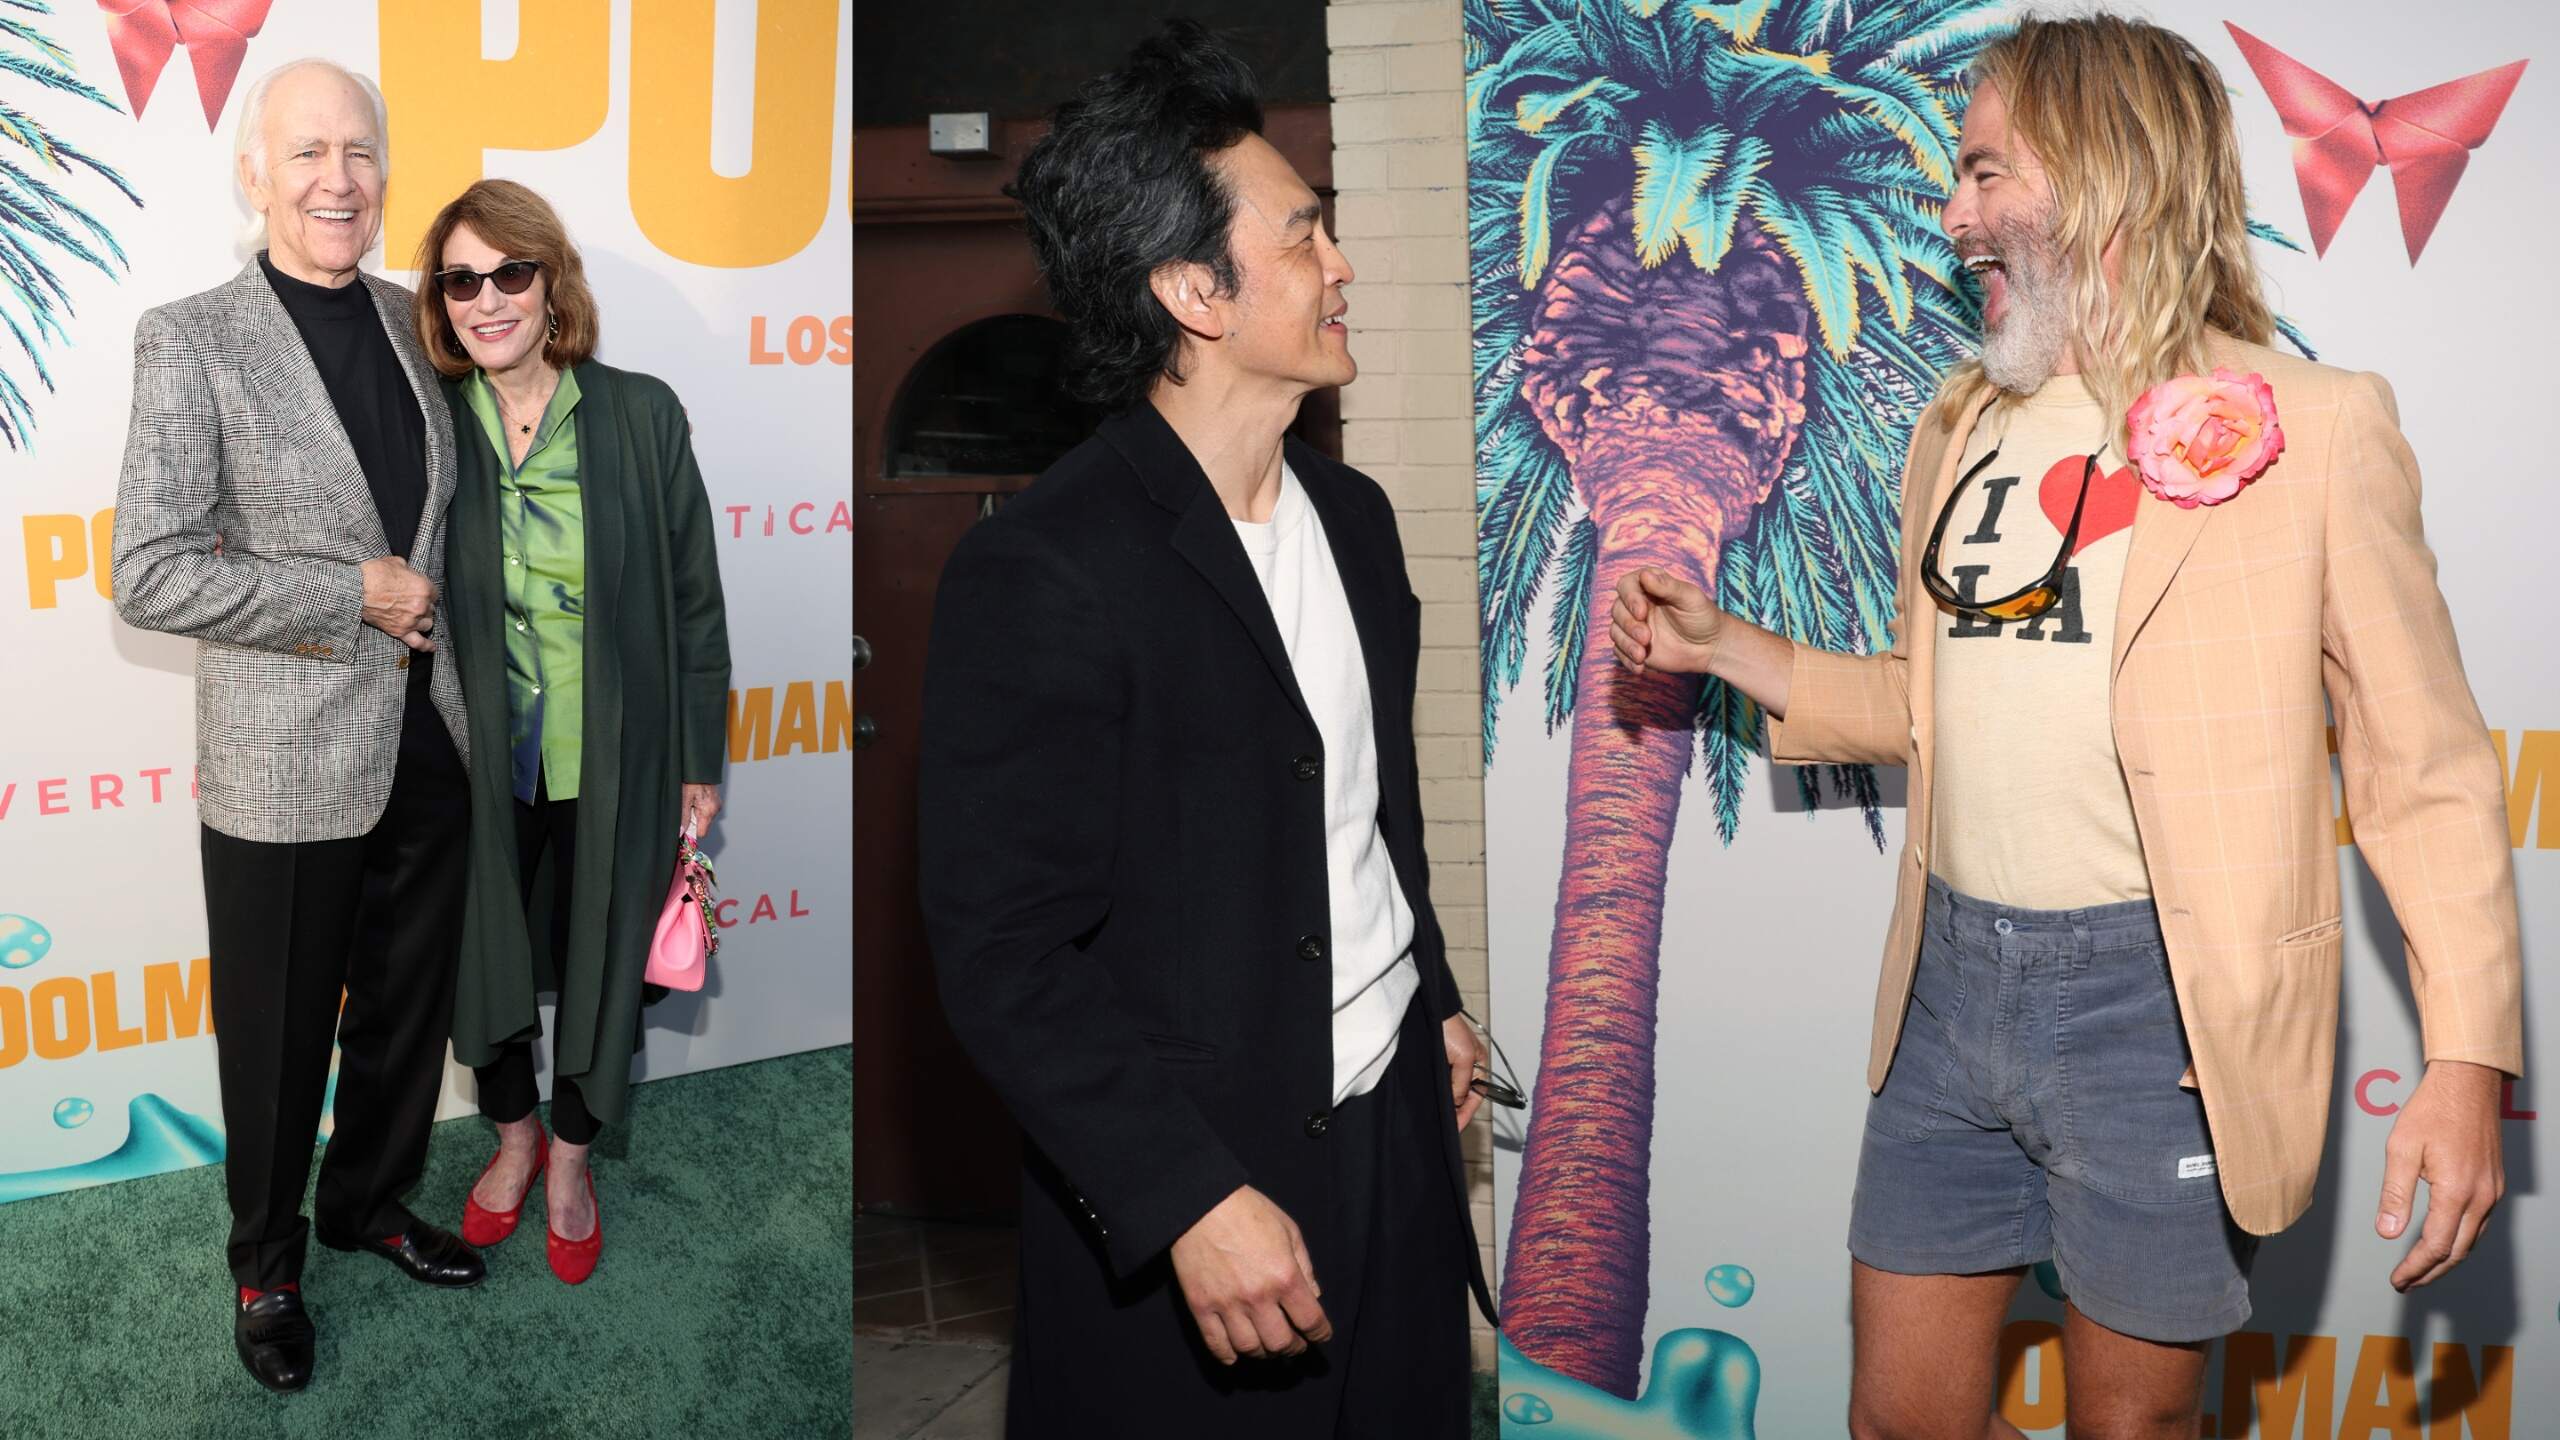 A photo of Chris Pine's parents Robert and Gwynne at his 'Poolman' premiere alongside a photo of John Cho and Chris Pine laughing at the premiere